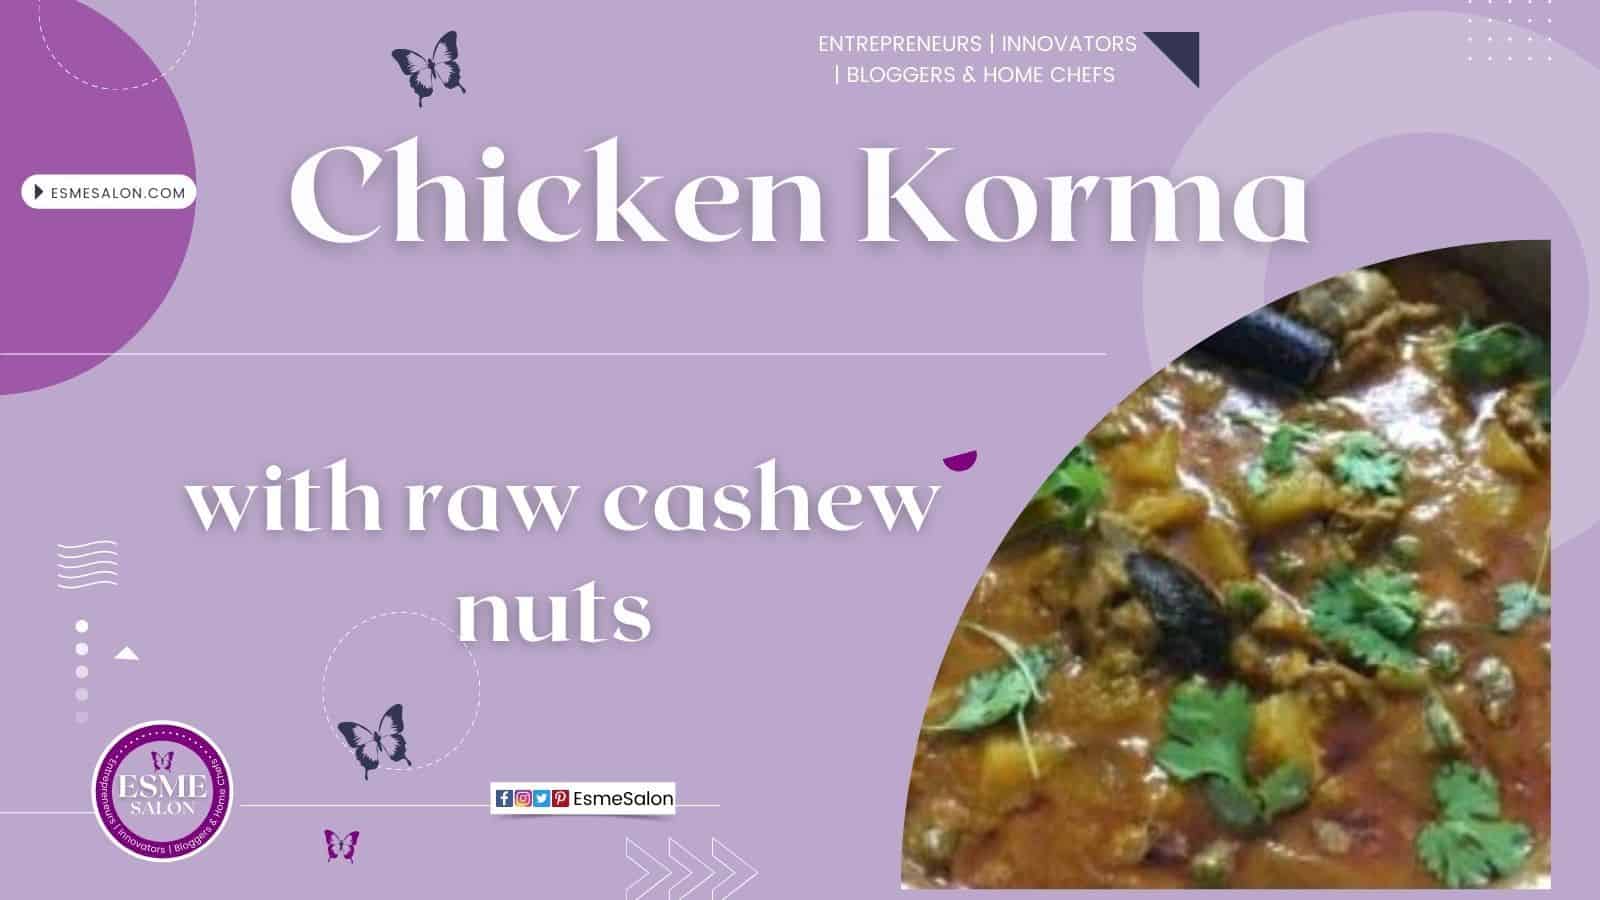 Chicken Korma with cashew nuts and chili